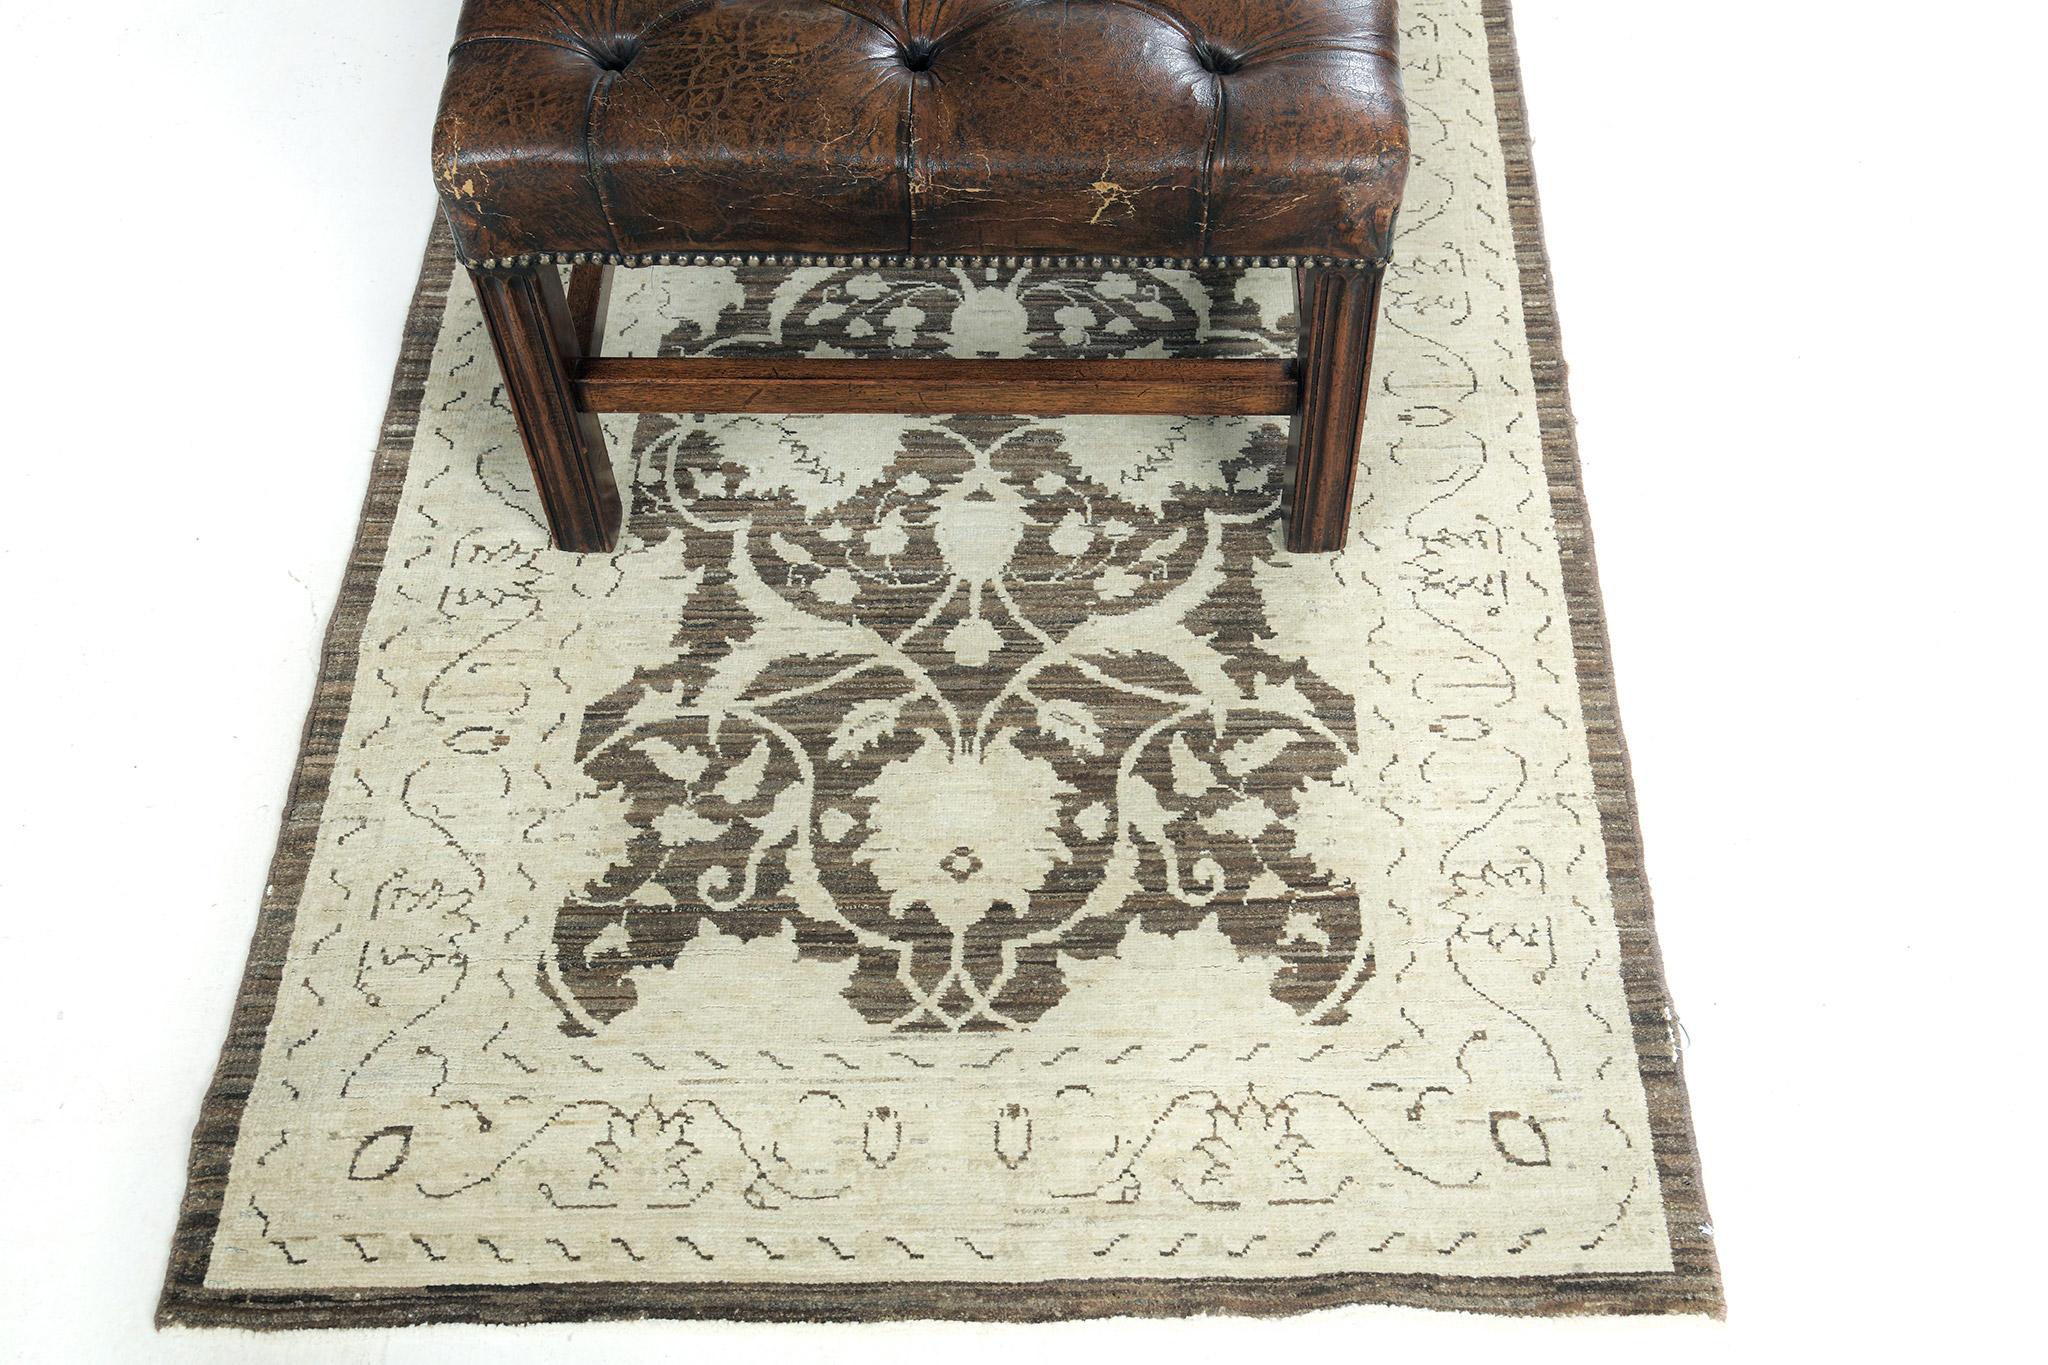 This impressive Tabriz runner centers an umber brownfield that reflects the symmetrical pattern of leaves. The main border contains symbolic motifs with an all-over lattice of scrolling vinery issuing split leaves and delicate flowering vinery that